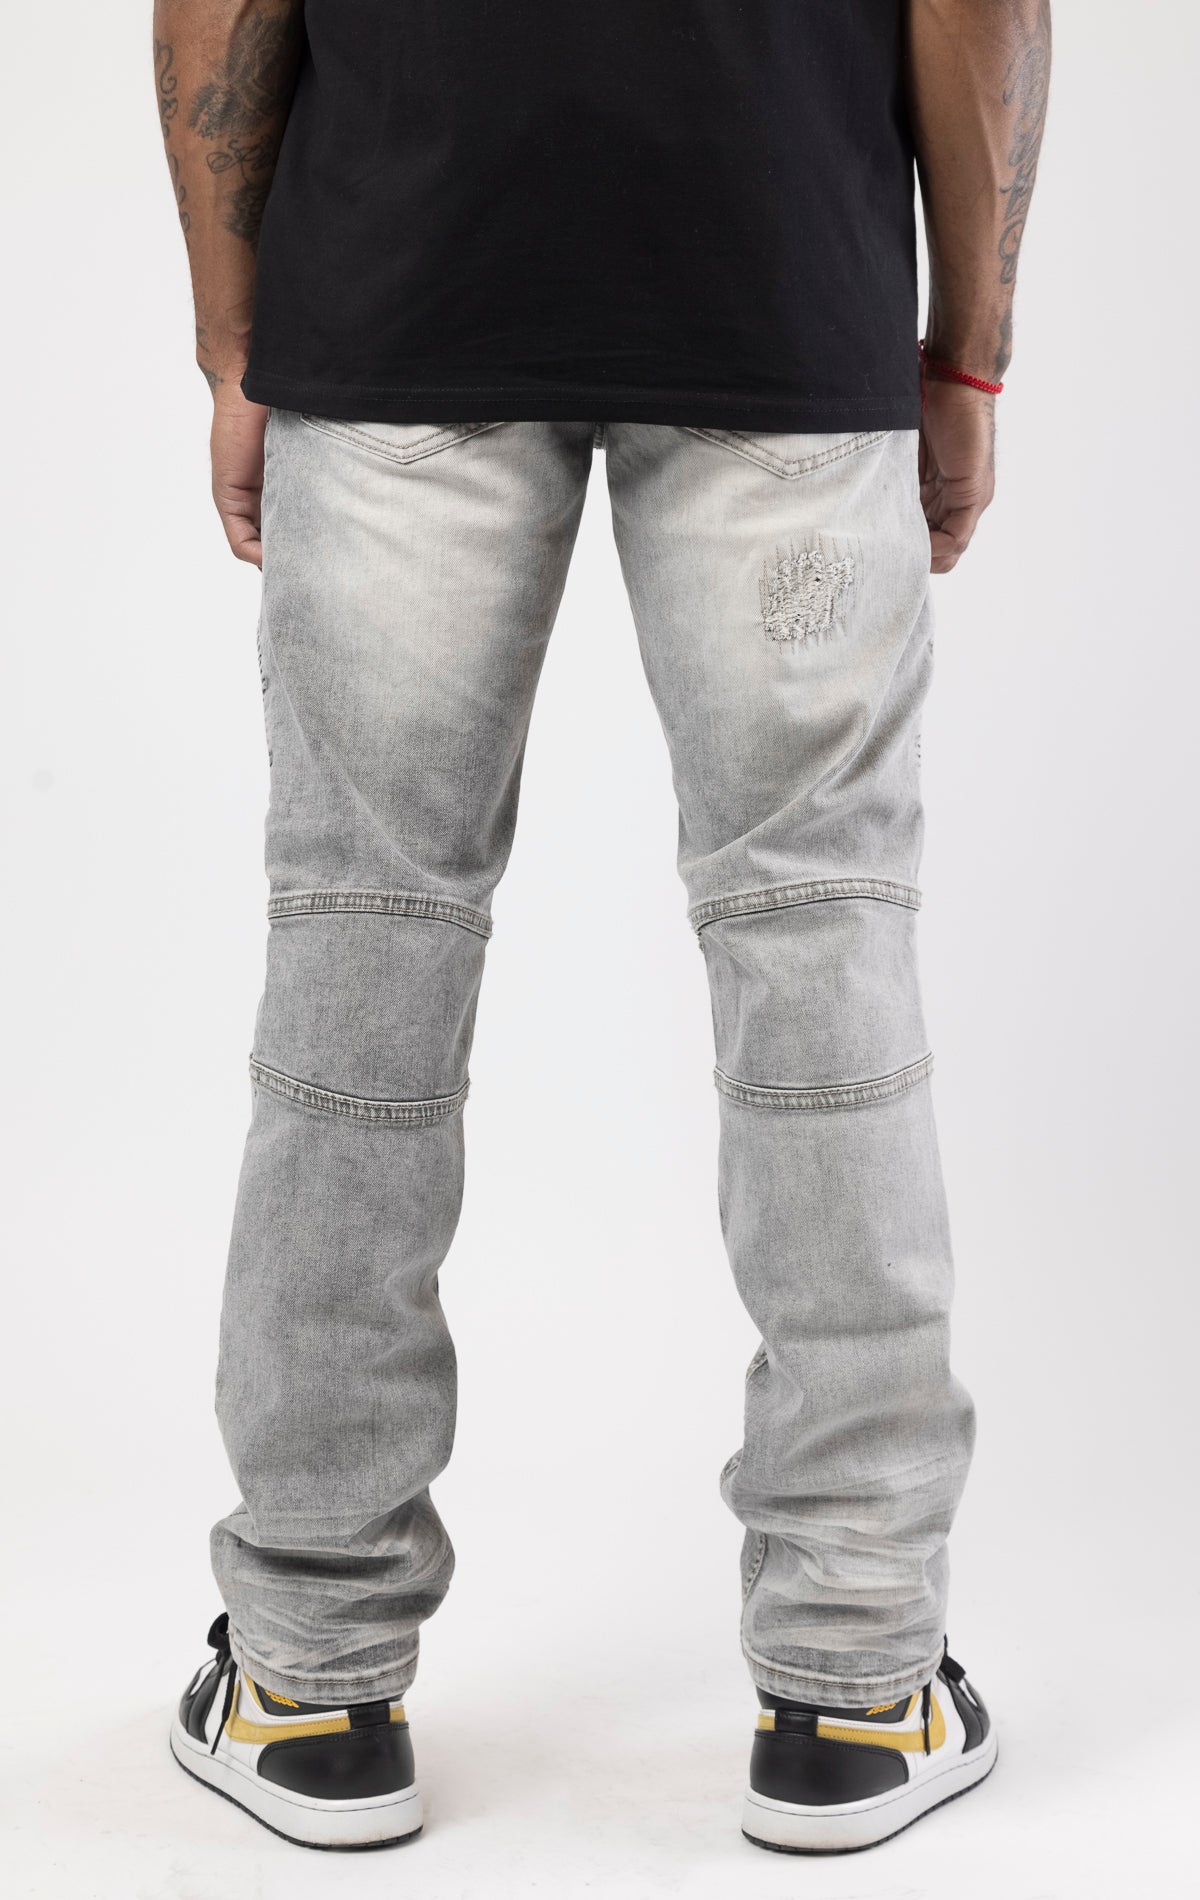 Gray high-quality denim made from 98% cotton and 2% spandex. With its rip and repair design and slim fit, it's the ultimate blend of style and comfort.